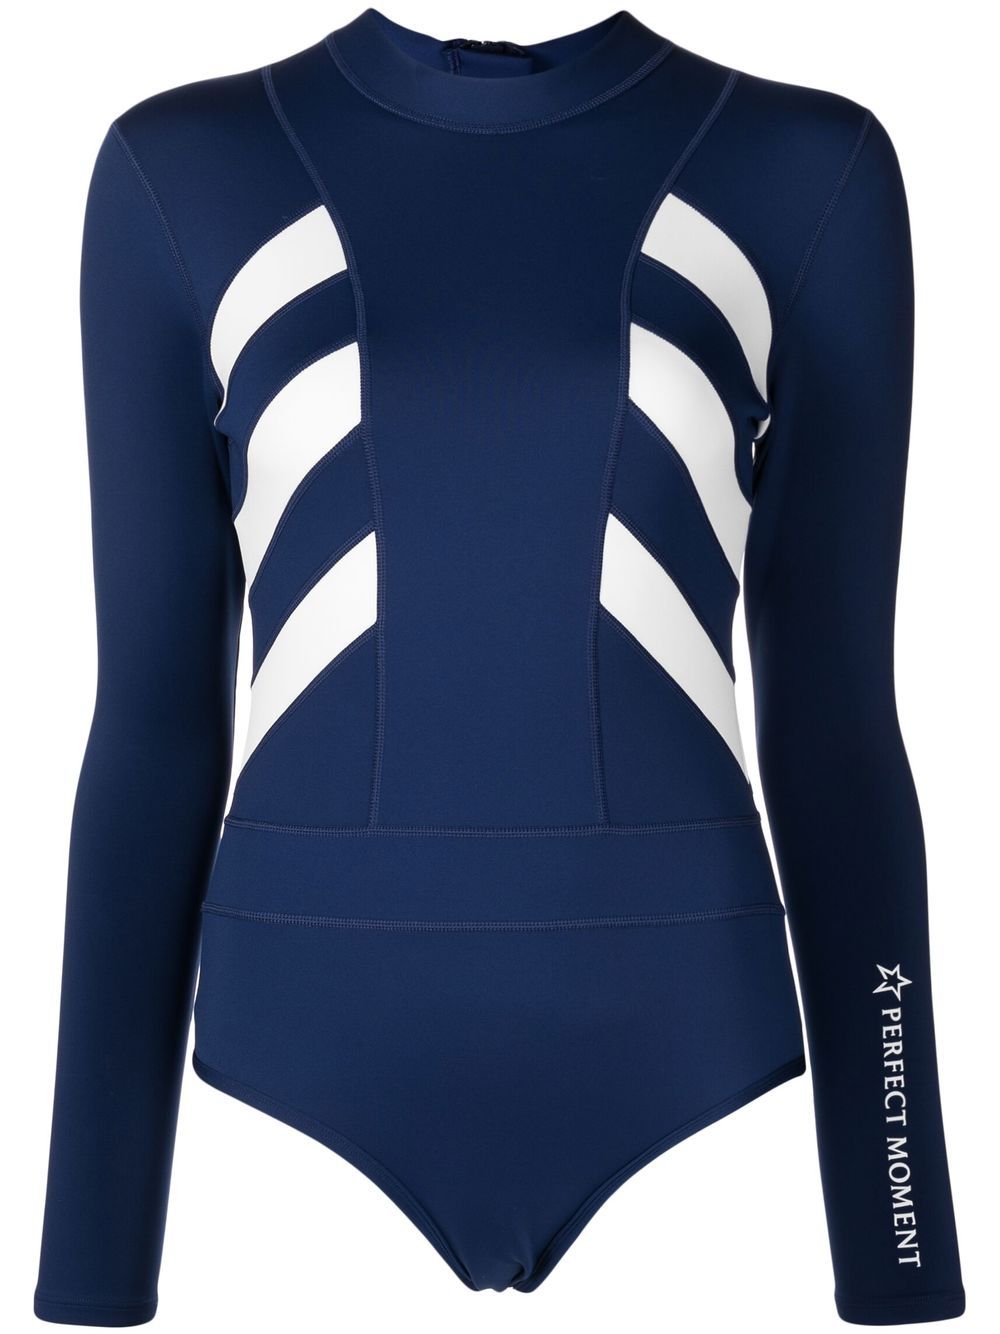 Perfect Moment Imok Neo Wetsuit In Navy